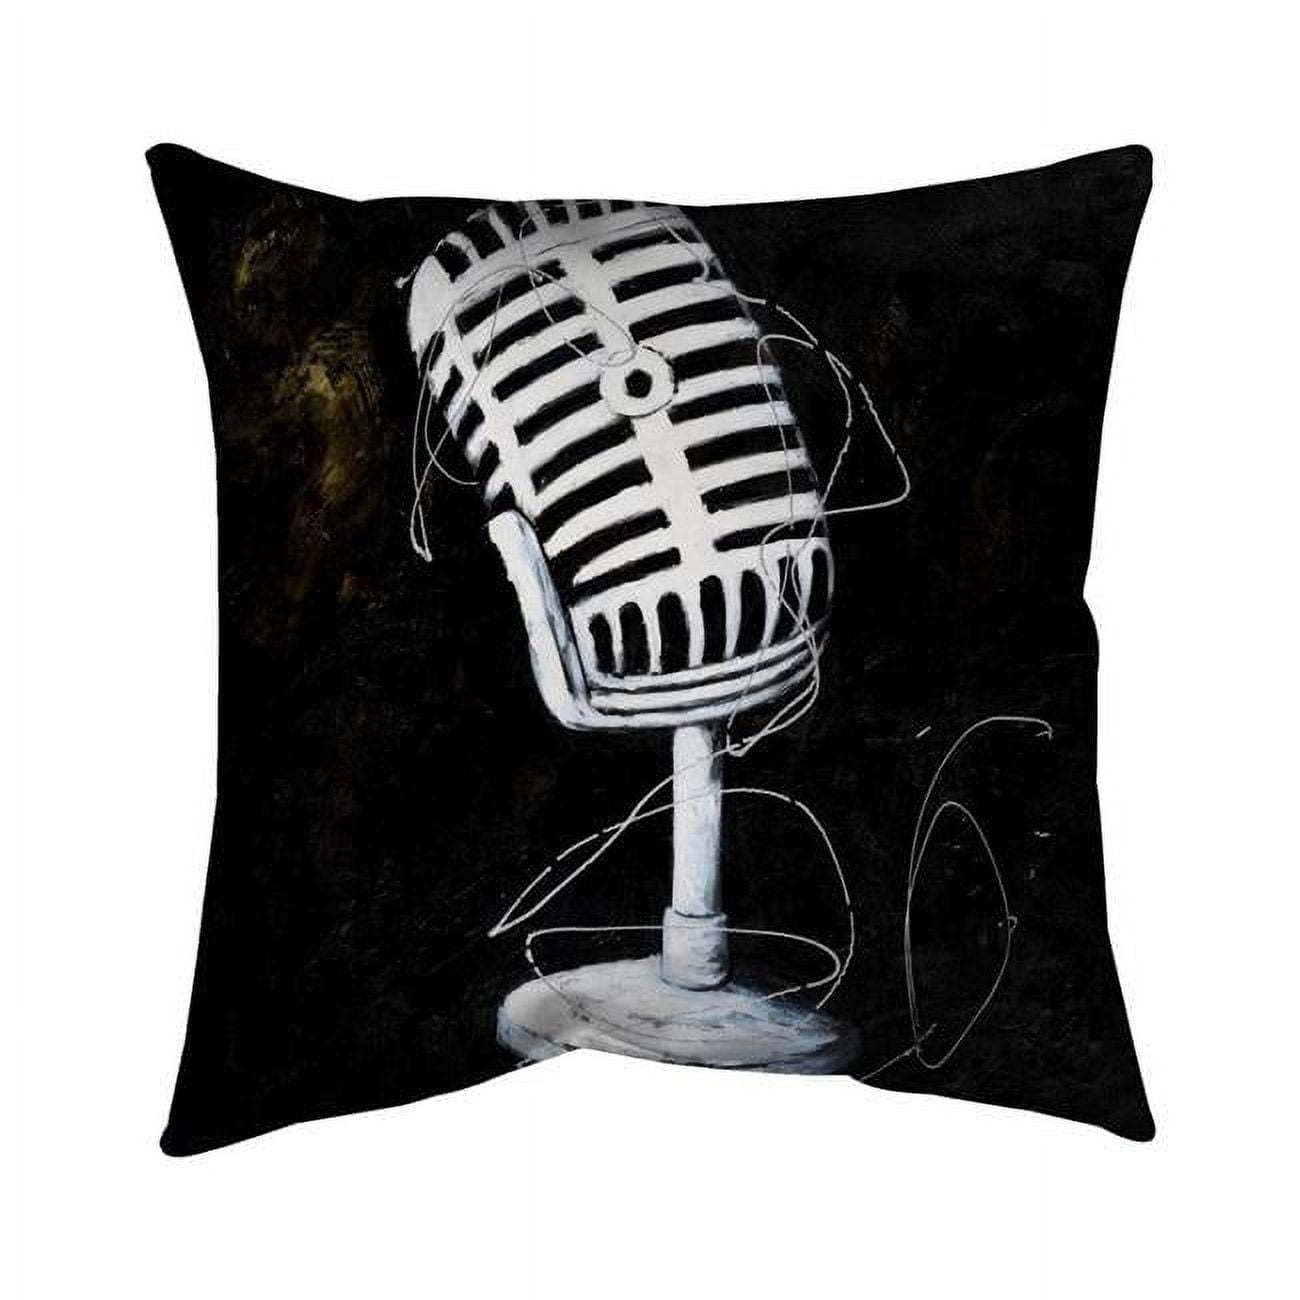 Begin Home Decor 5542-1616-MU27 16 x 16 in. Microphone-Double Sided Print Outdoor Pillow Cover